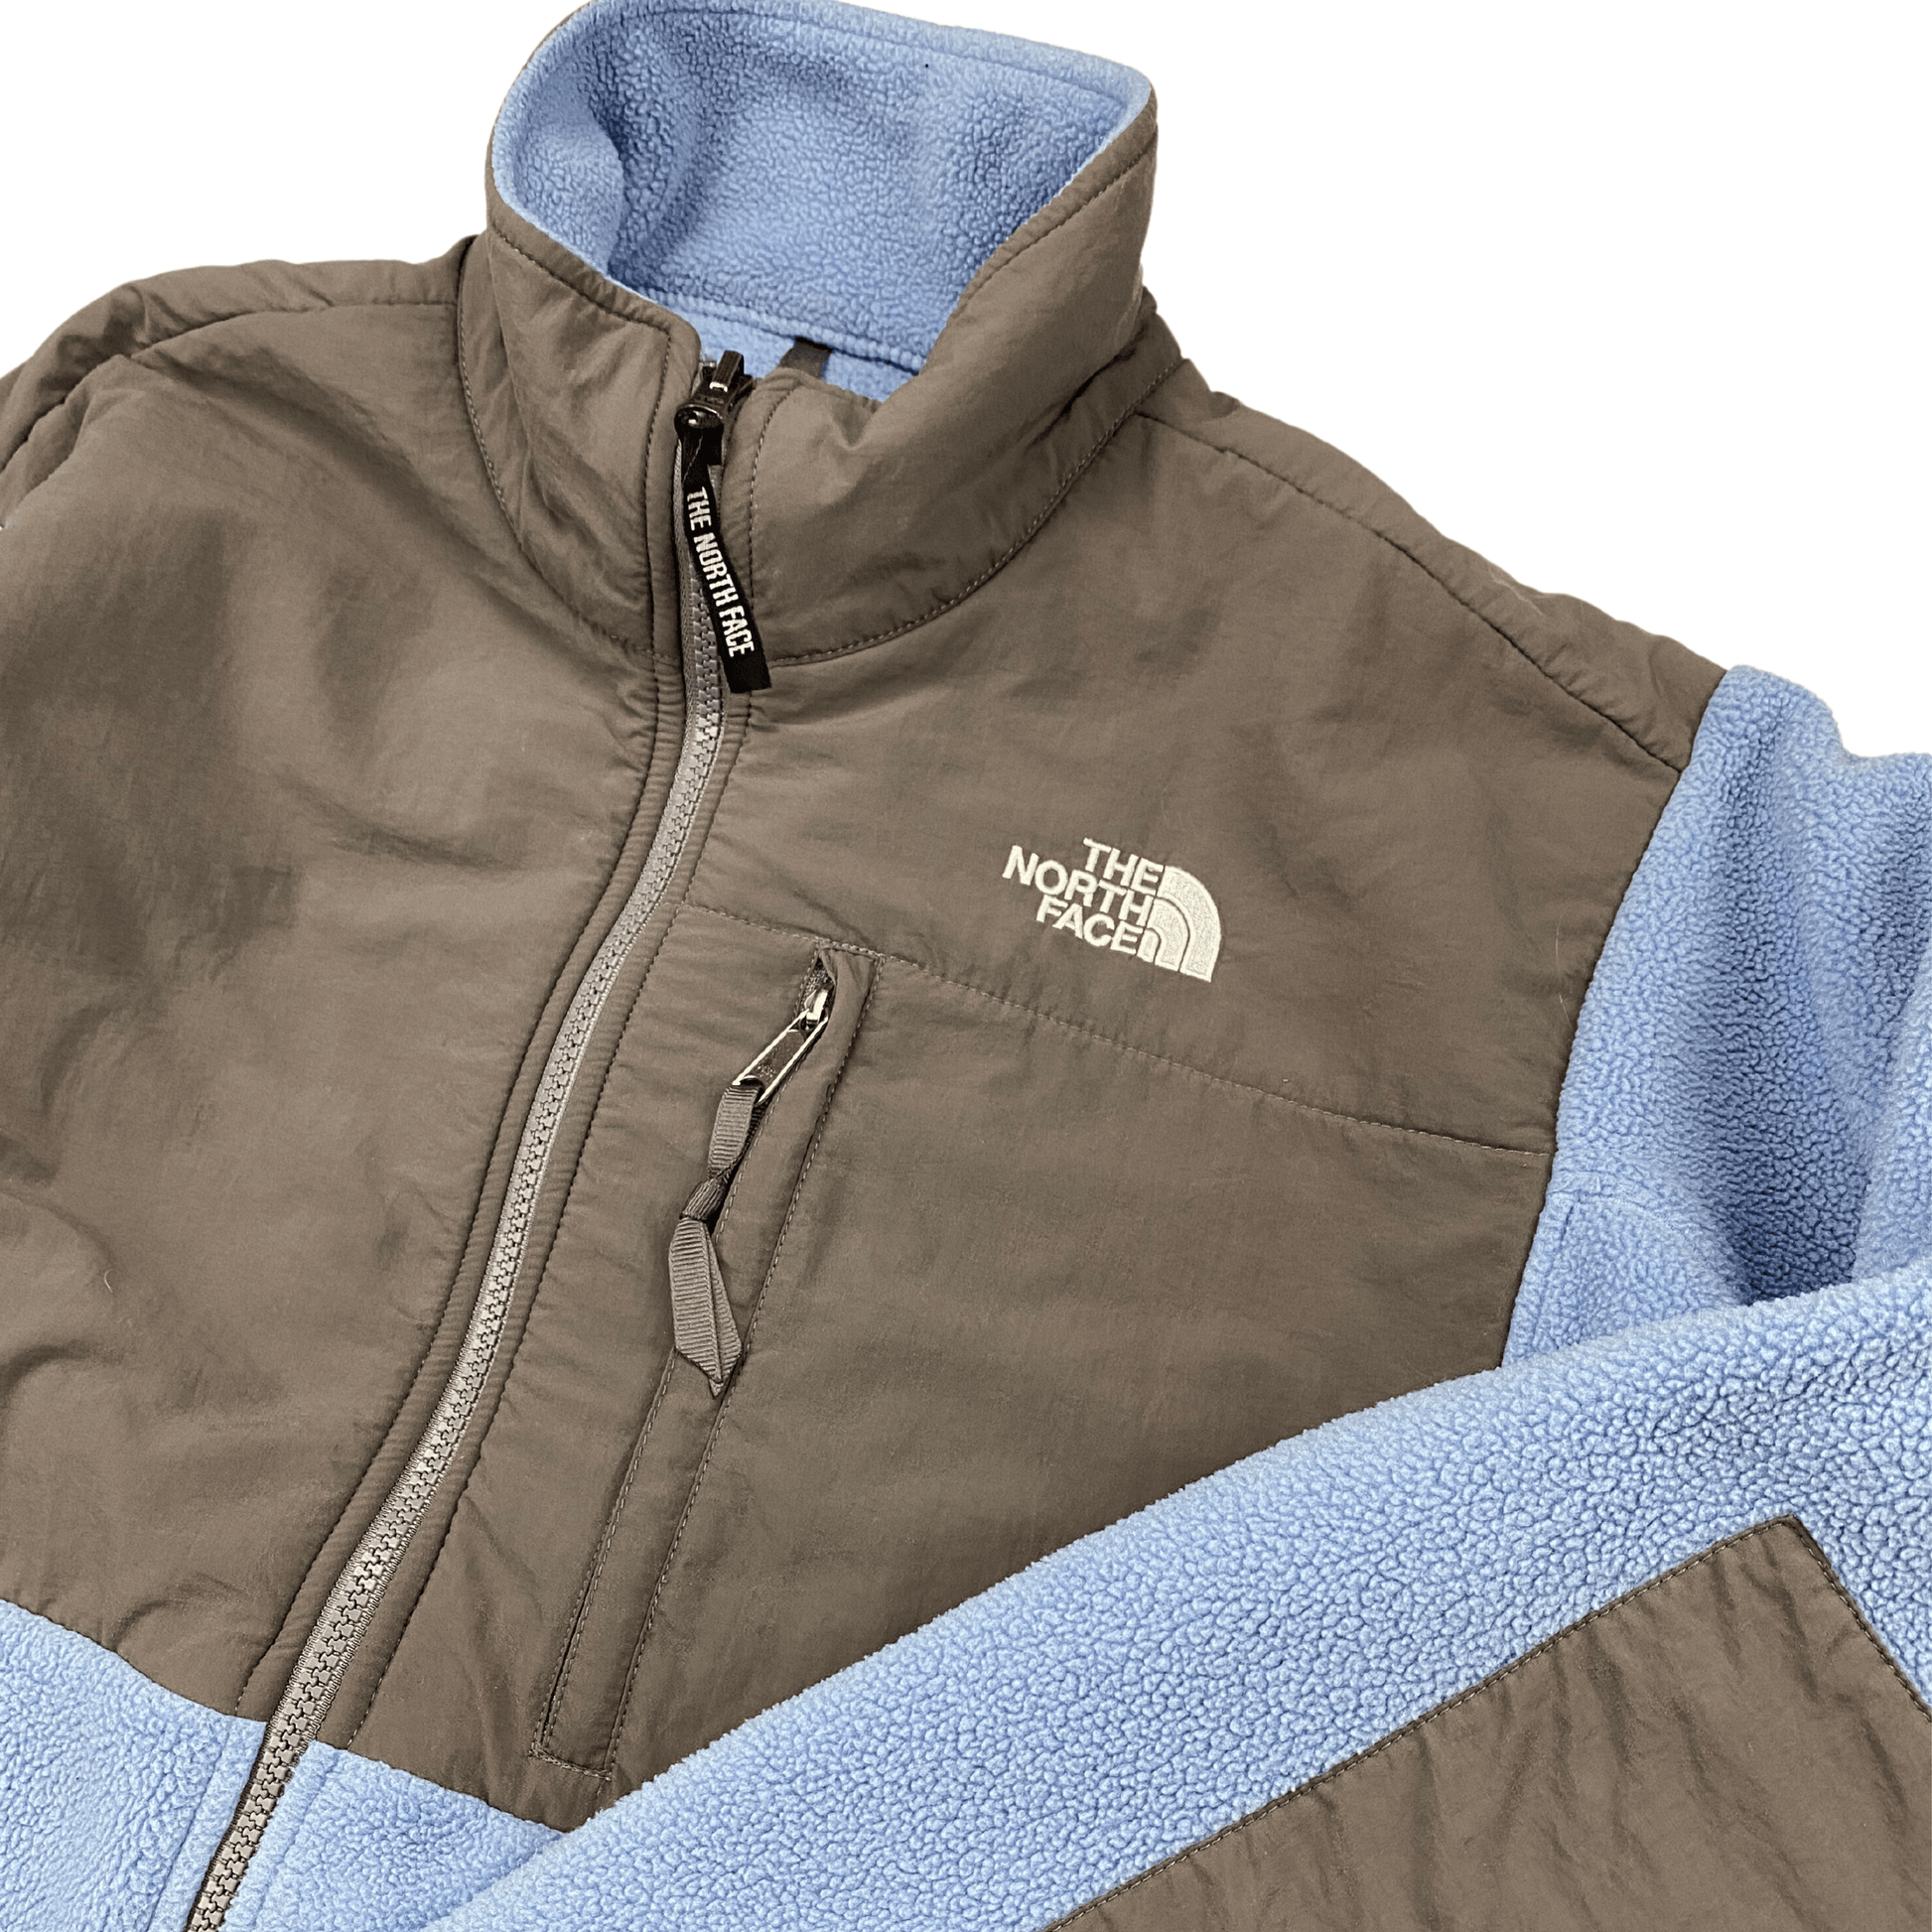 THE NORTH FACE DENALI LILAC (M/L) - Known Source